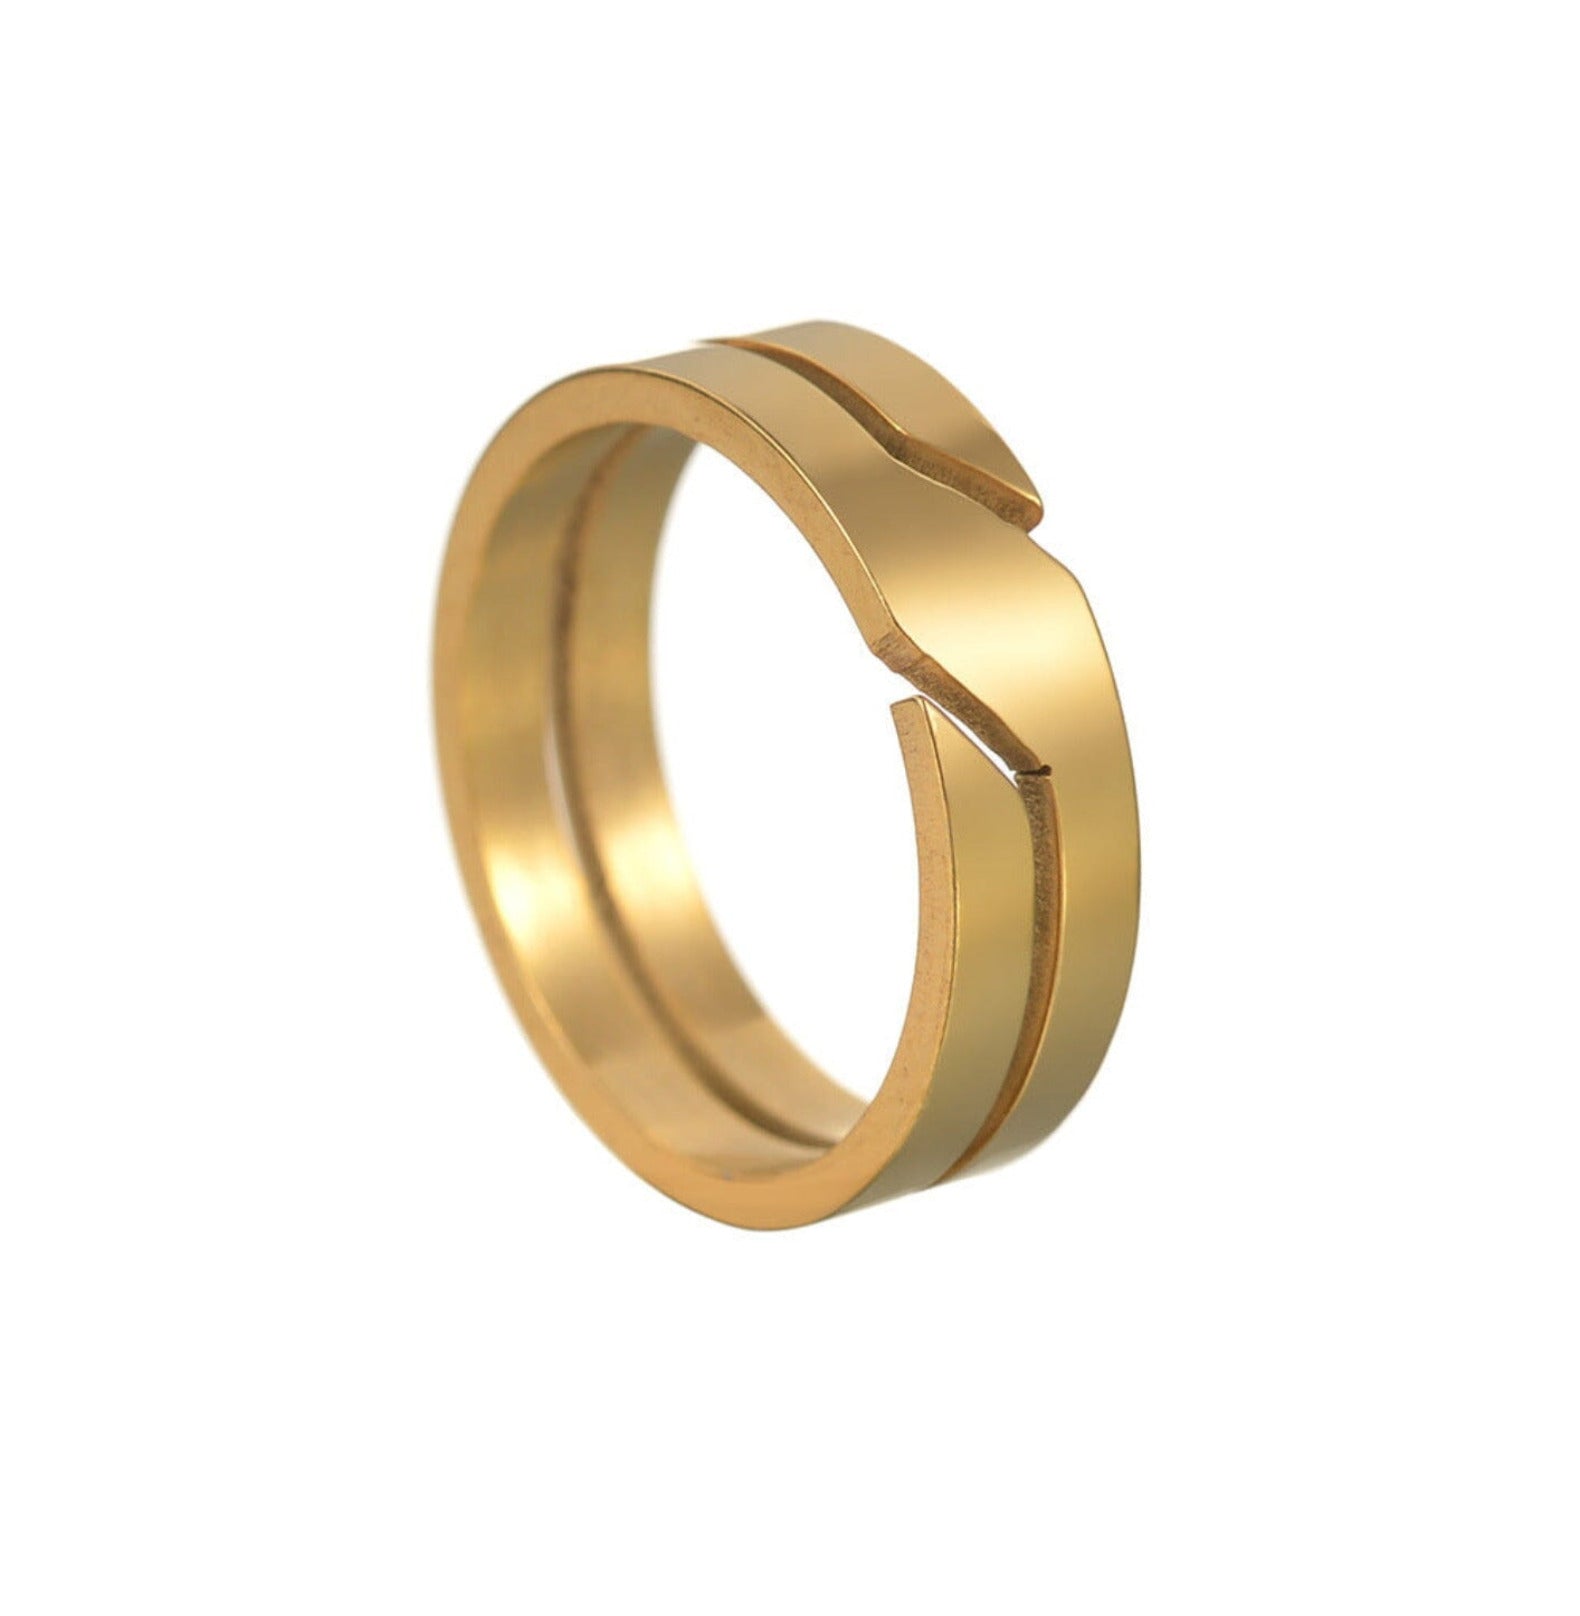 GEOMETRIC RING ring Yubama Jewelry Online Store - The Elegant Designs of Gold and Silver ! Gold 10 